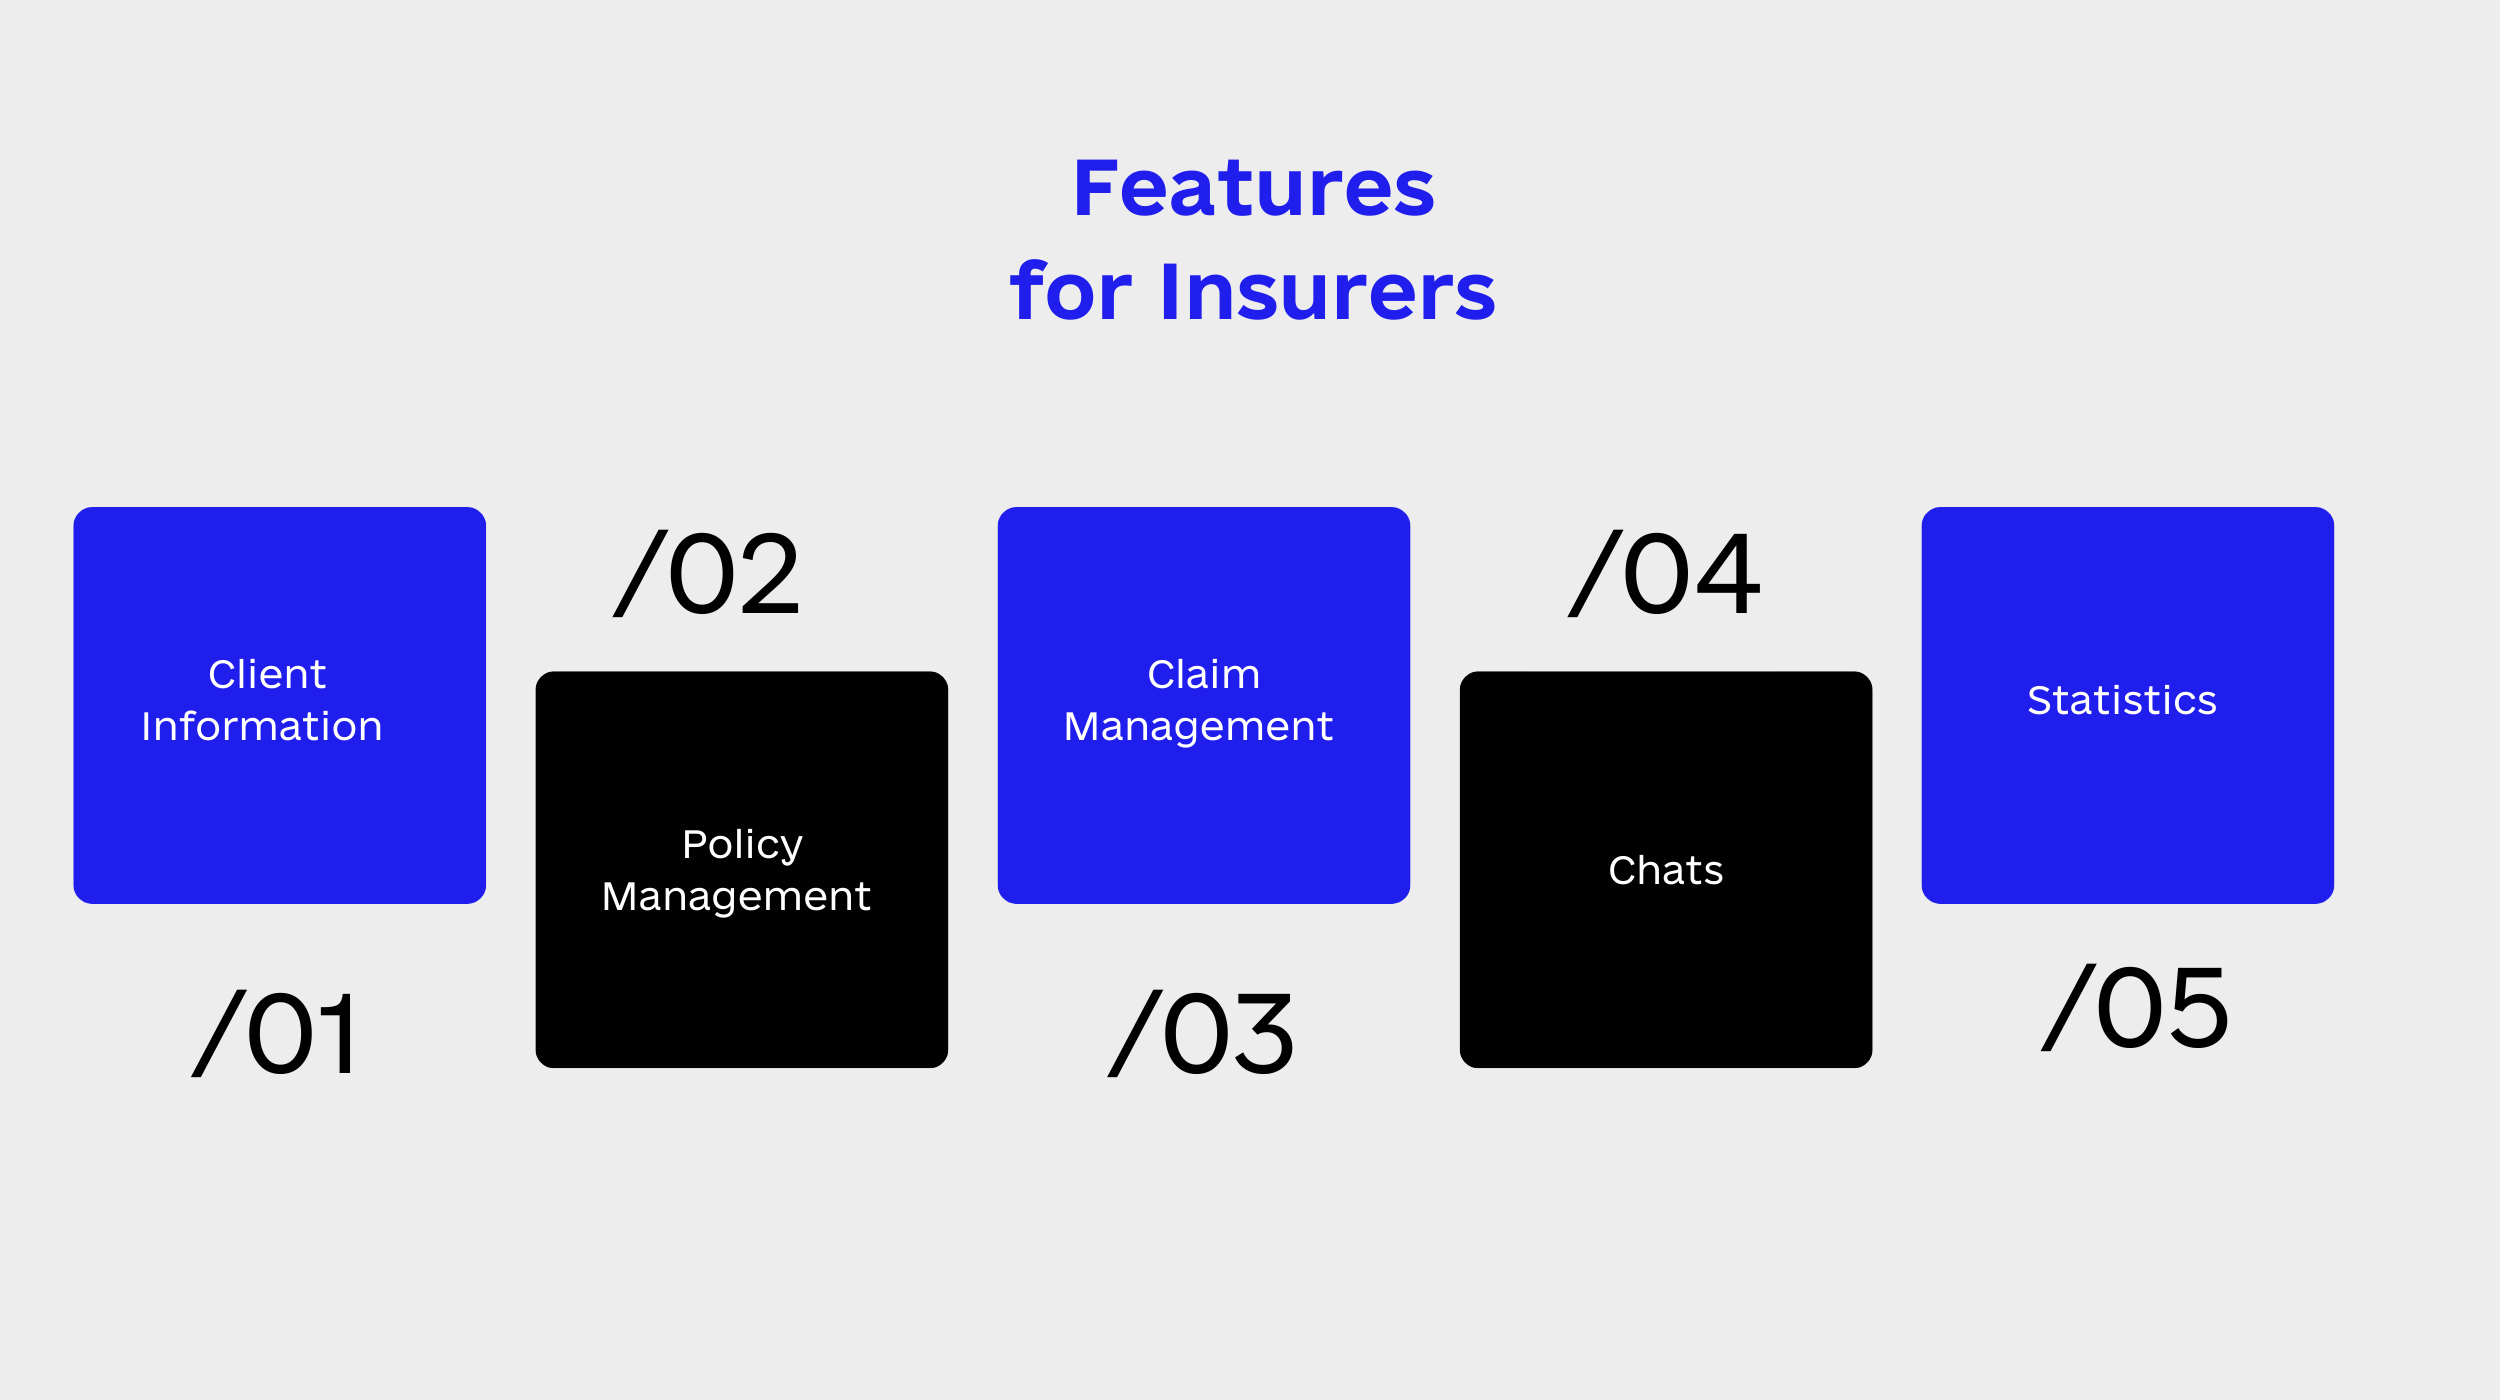 Features for Insurers